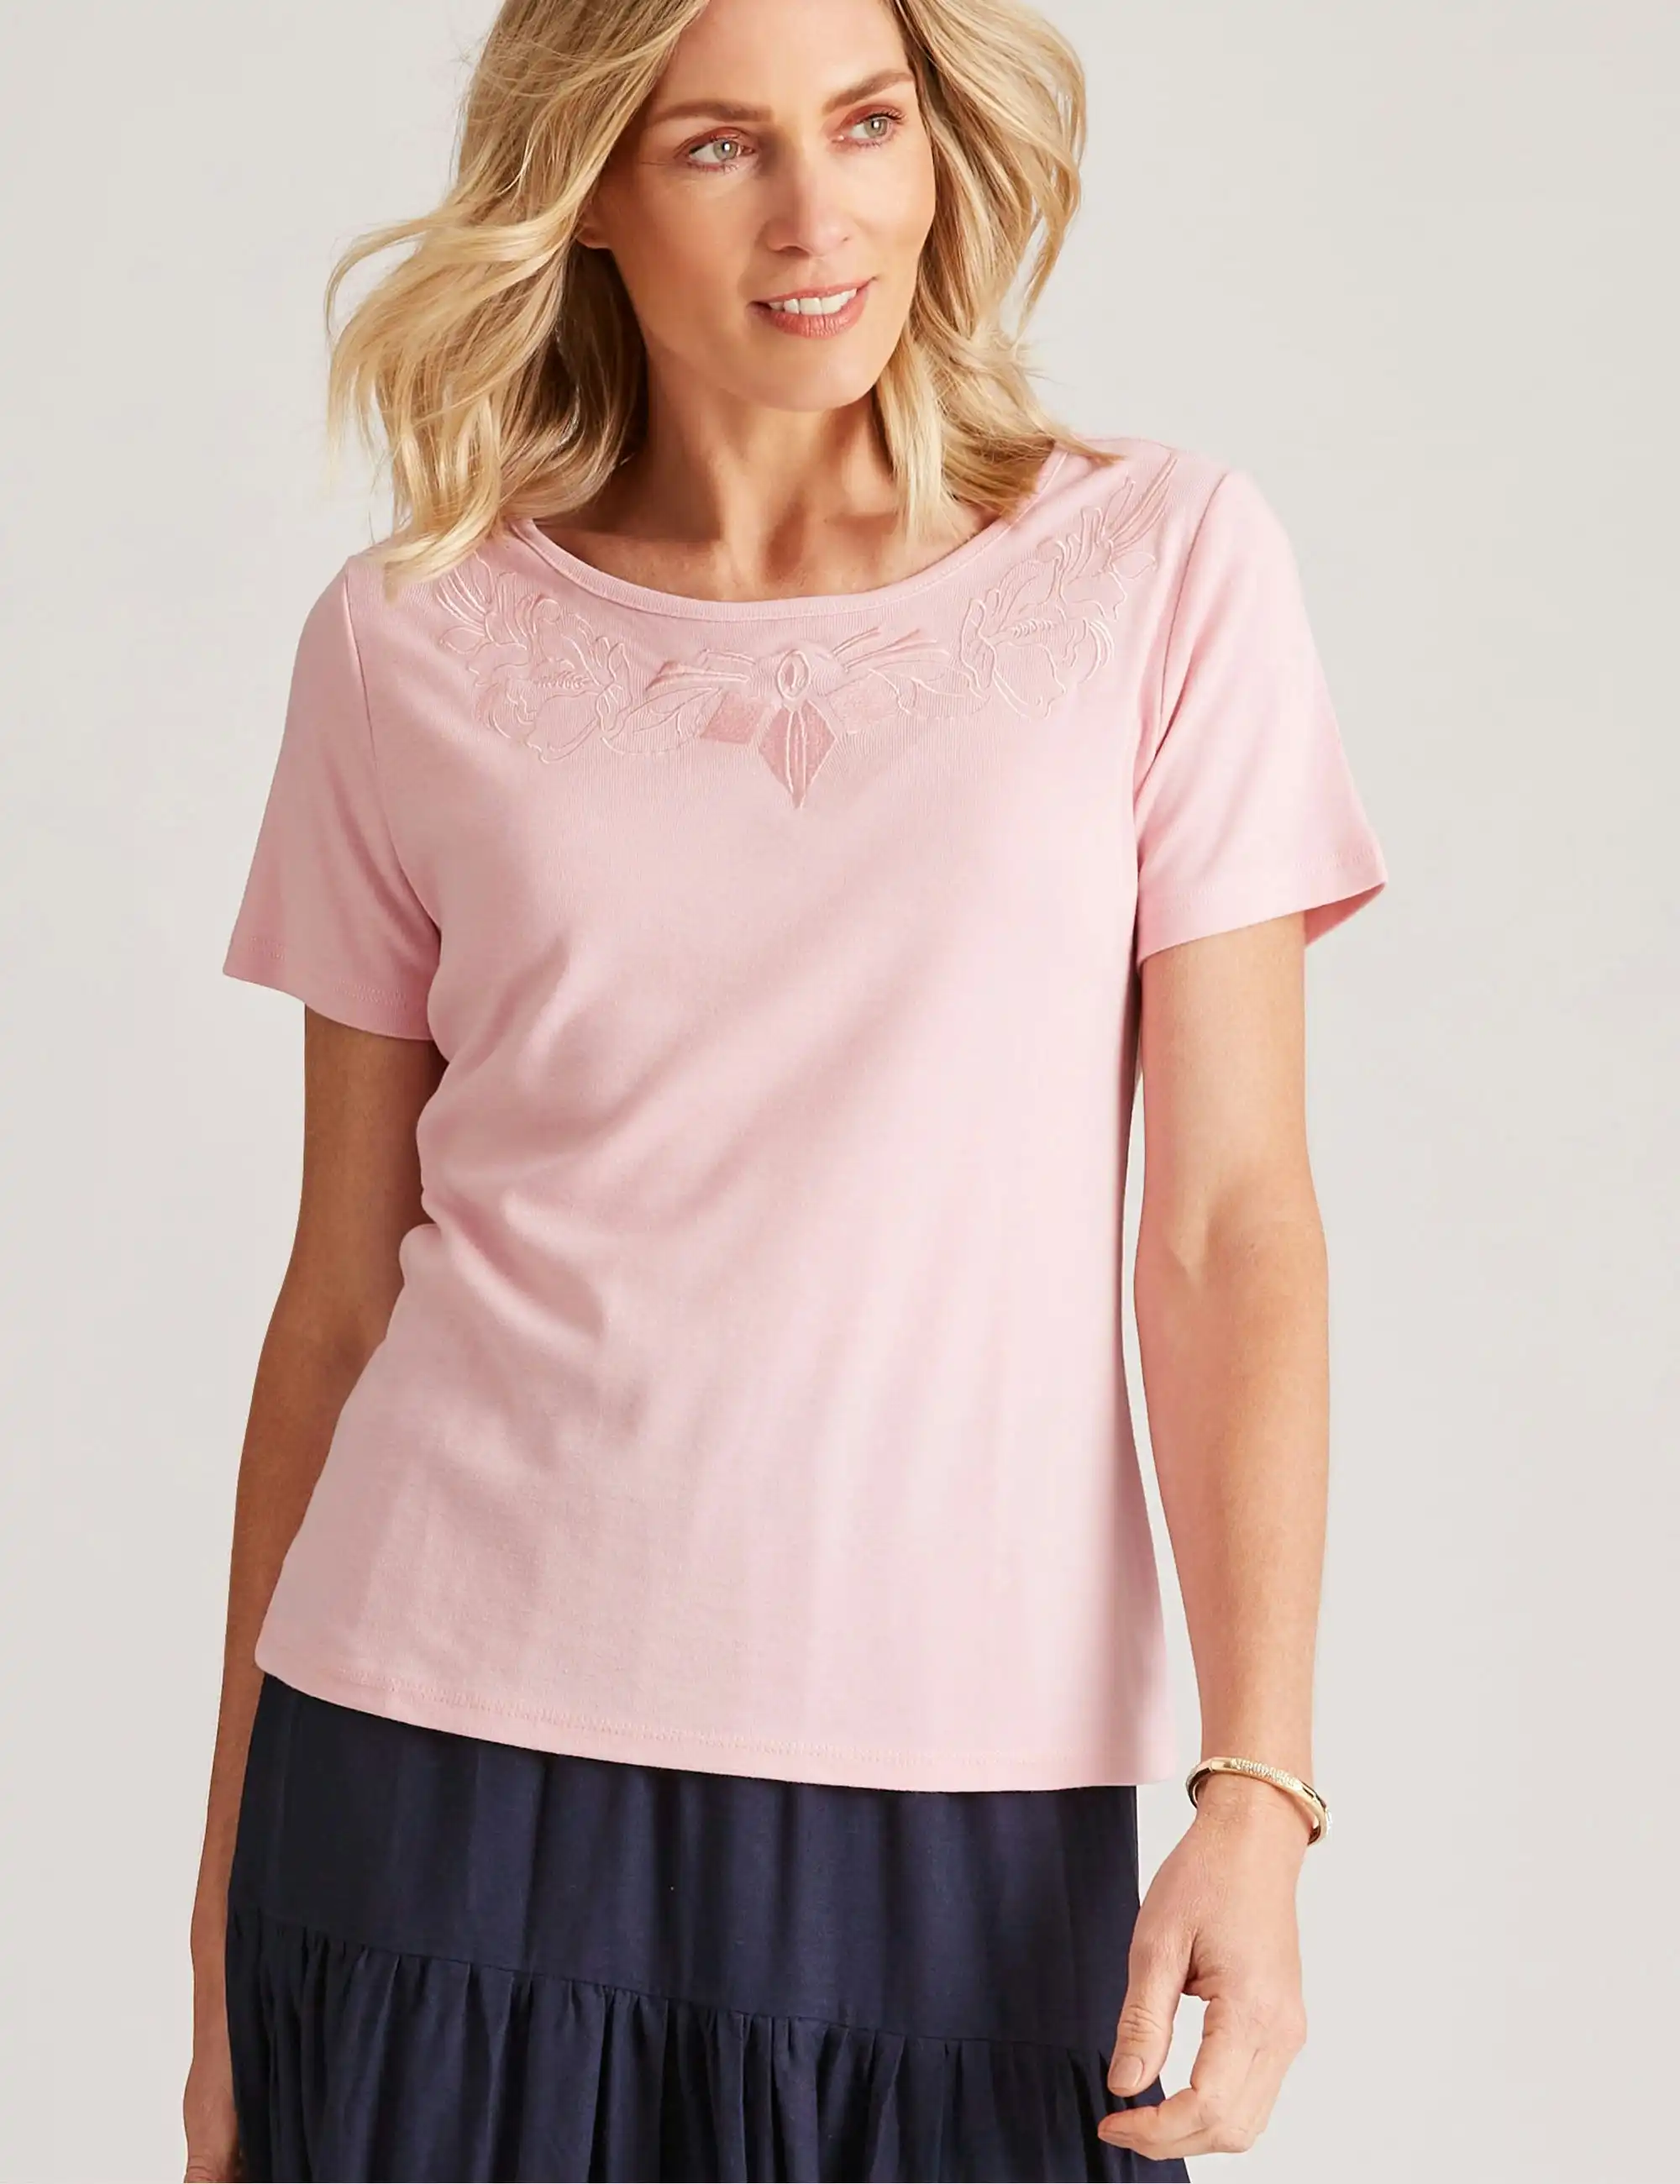 Noni B Round Neck Embroidered Rib Top (Pale Pink)